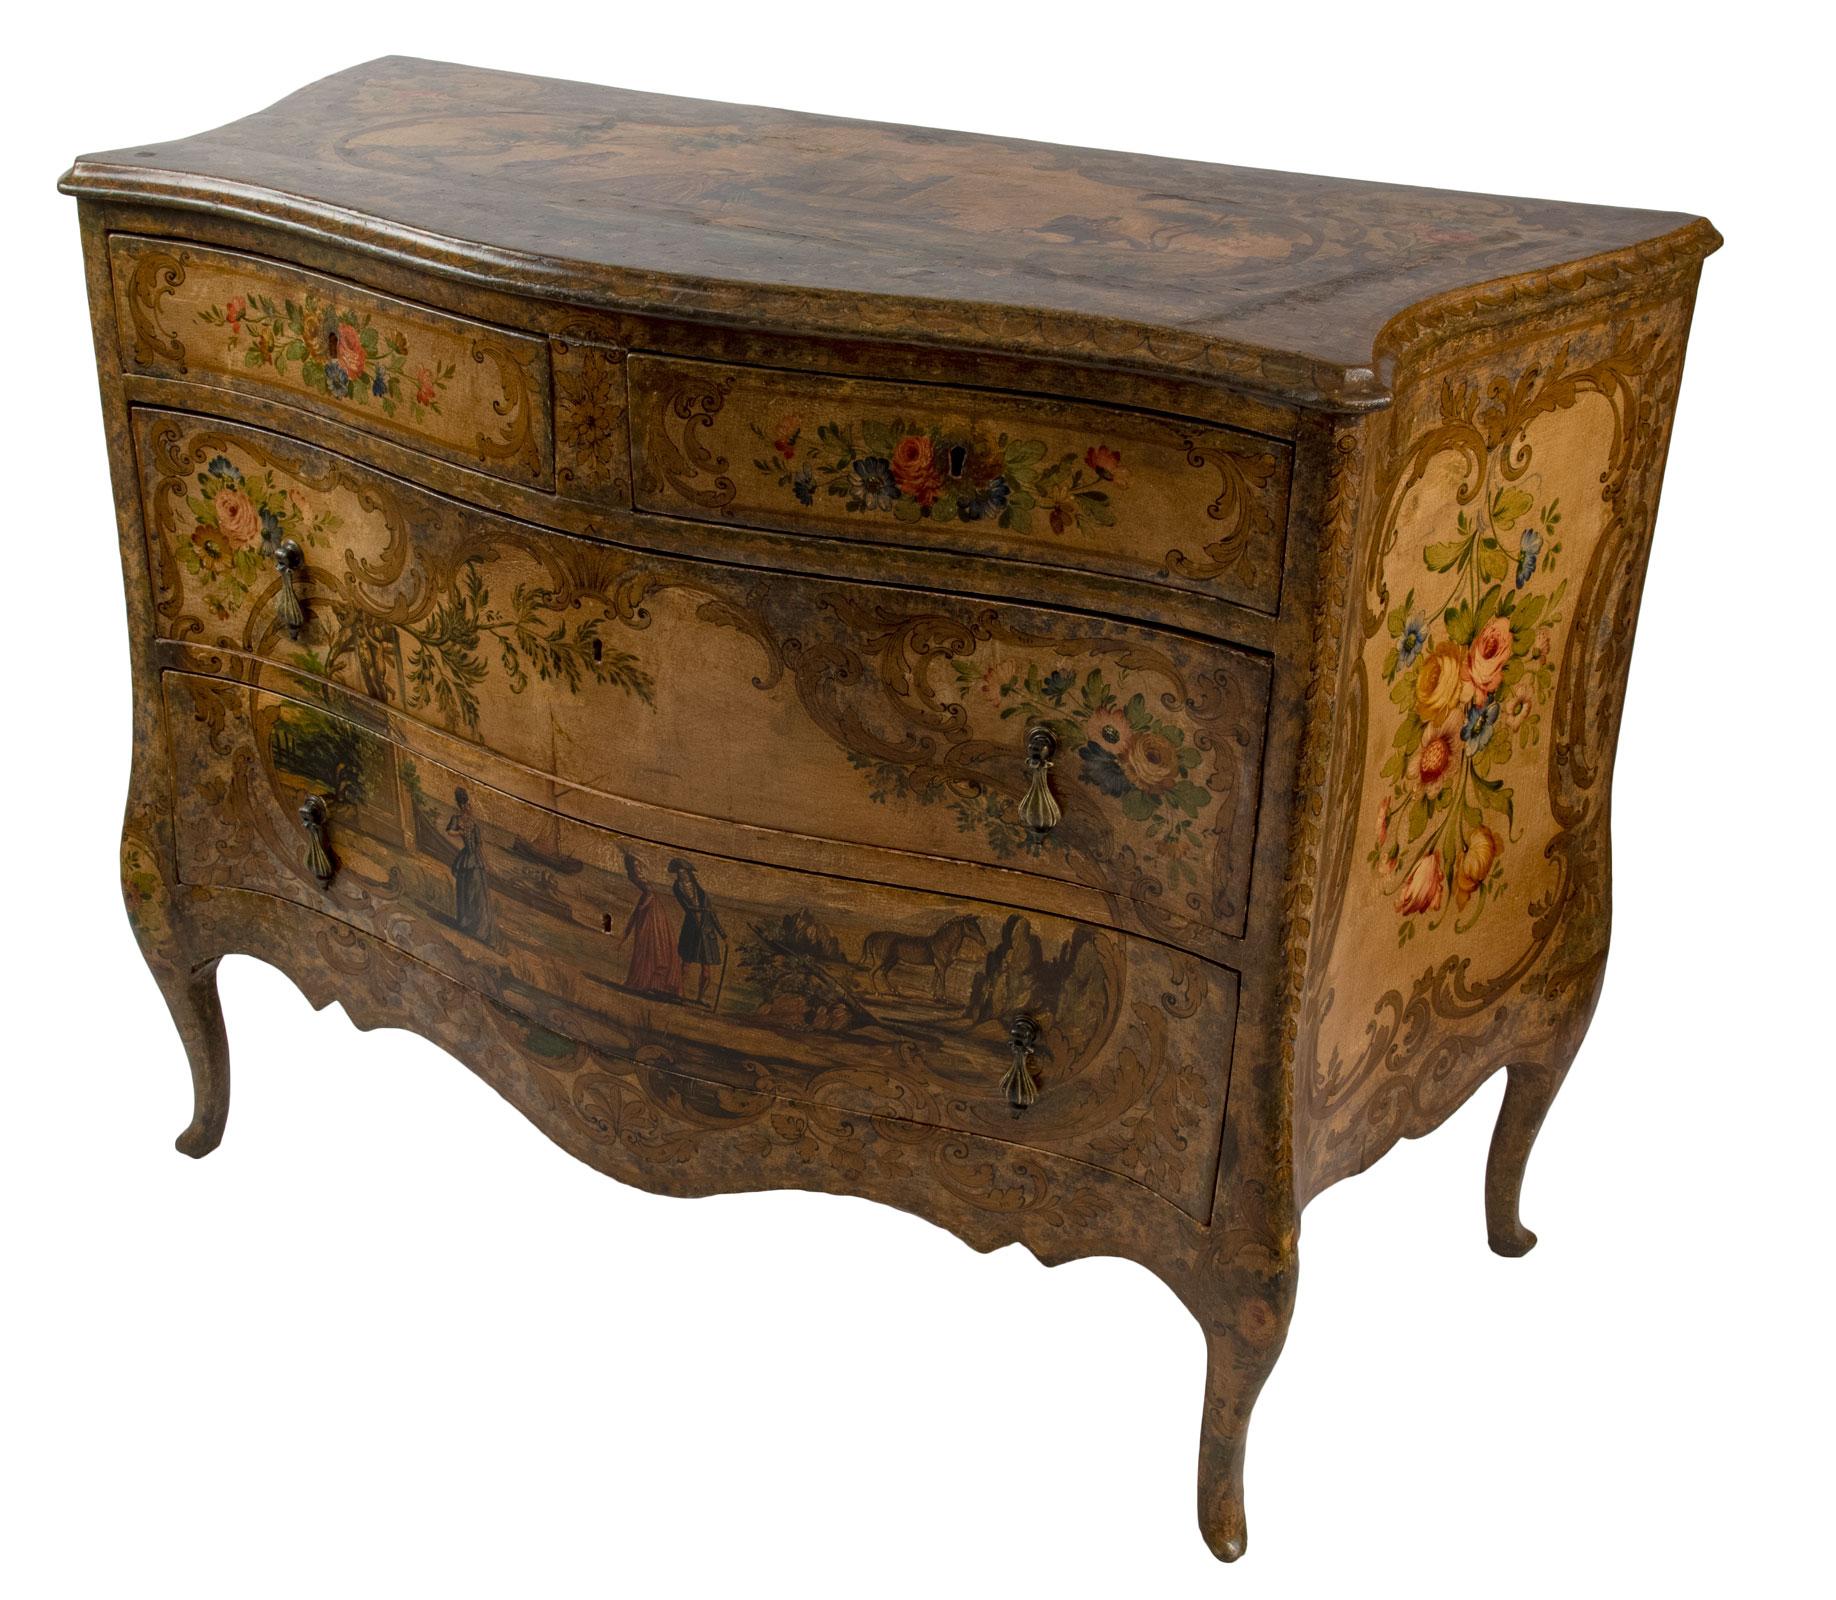 A large Rococo style Venetian painted three drawer commode painted with architectural elements, floral sprays, and pastoral scenes.